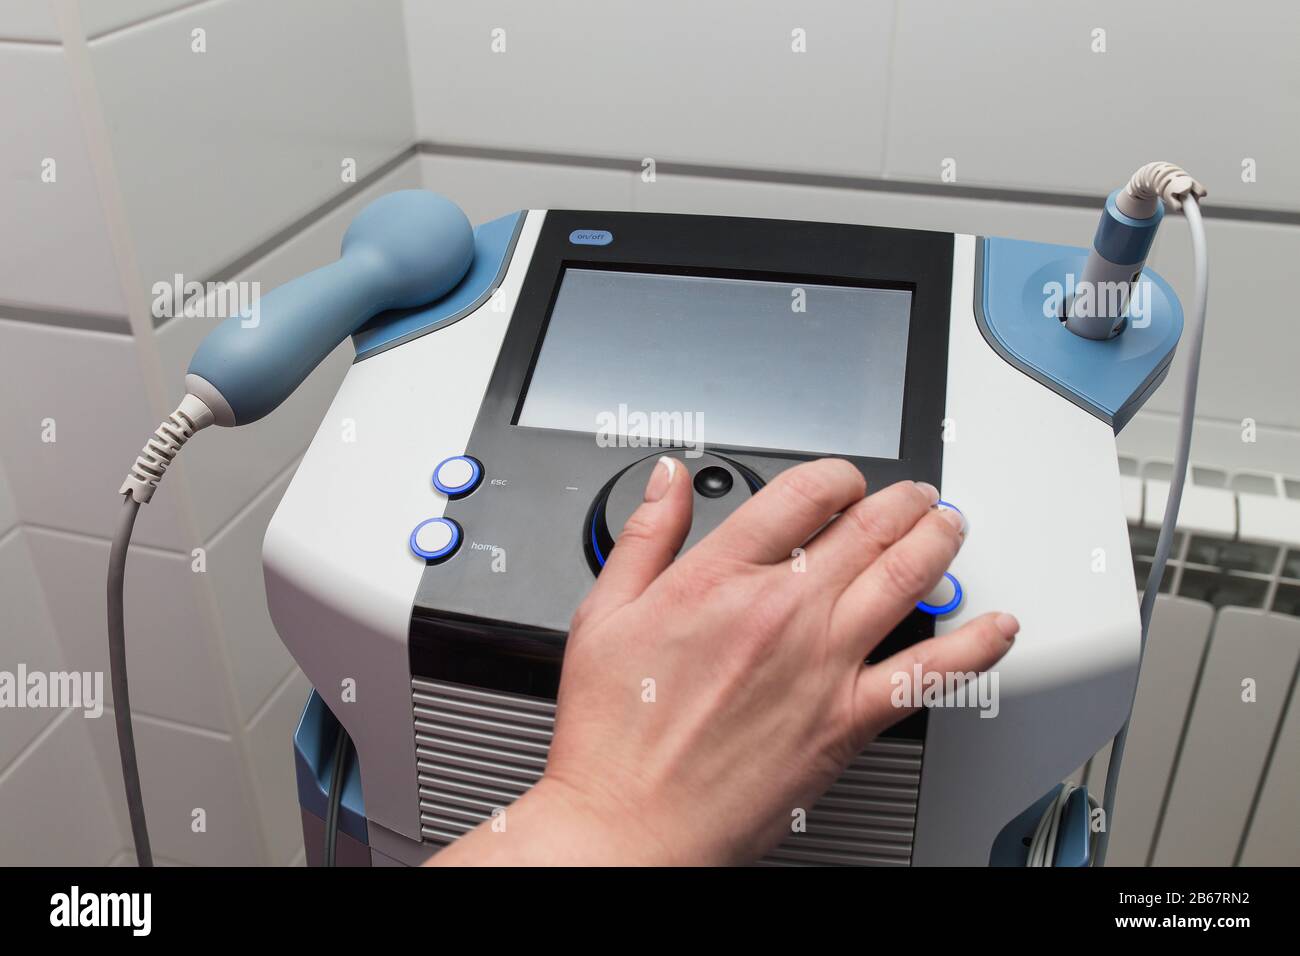 https://c8.alamy.com/comp/2B67RN2/medical-ultrasound-therapy-device-with-the-hand-of-medical-worker-as-operator-setting-the-apparatus-2B67RN2.jpg